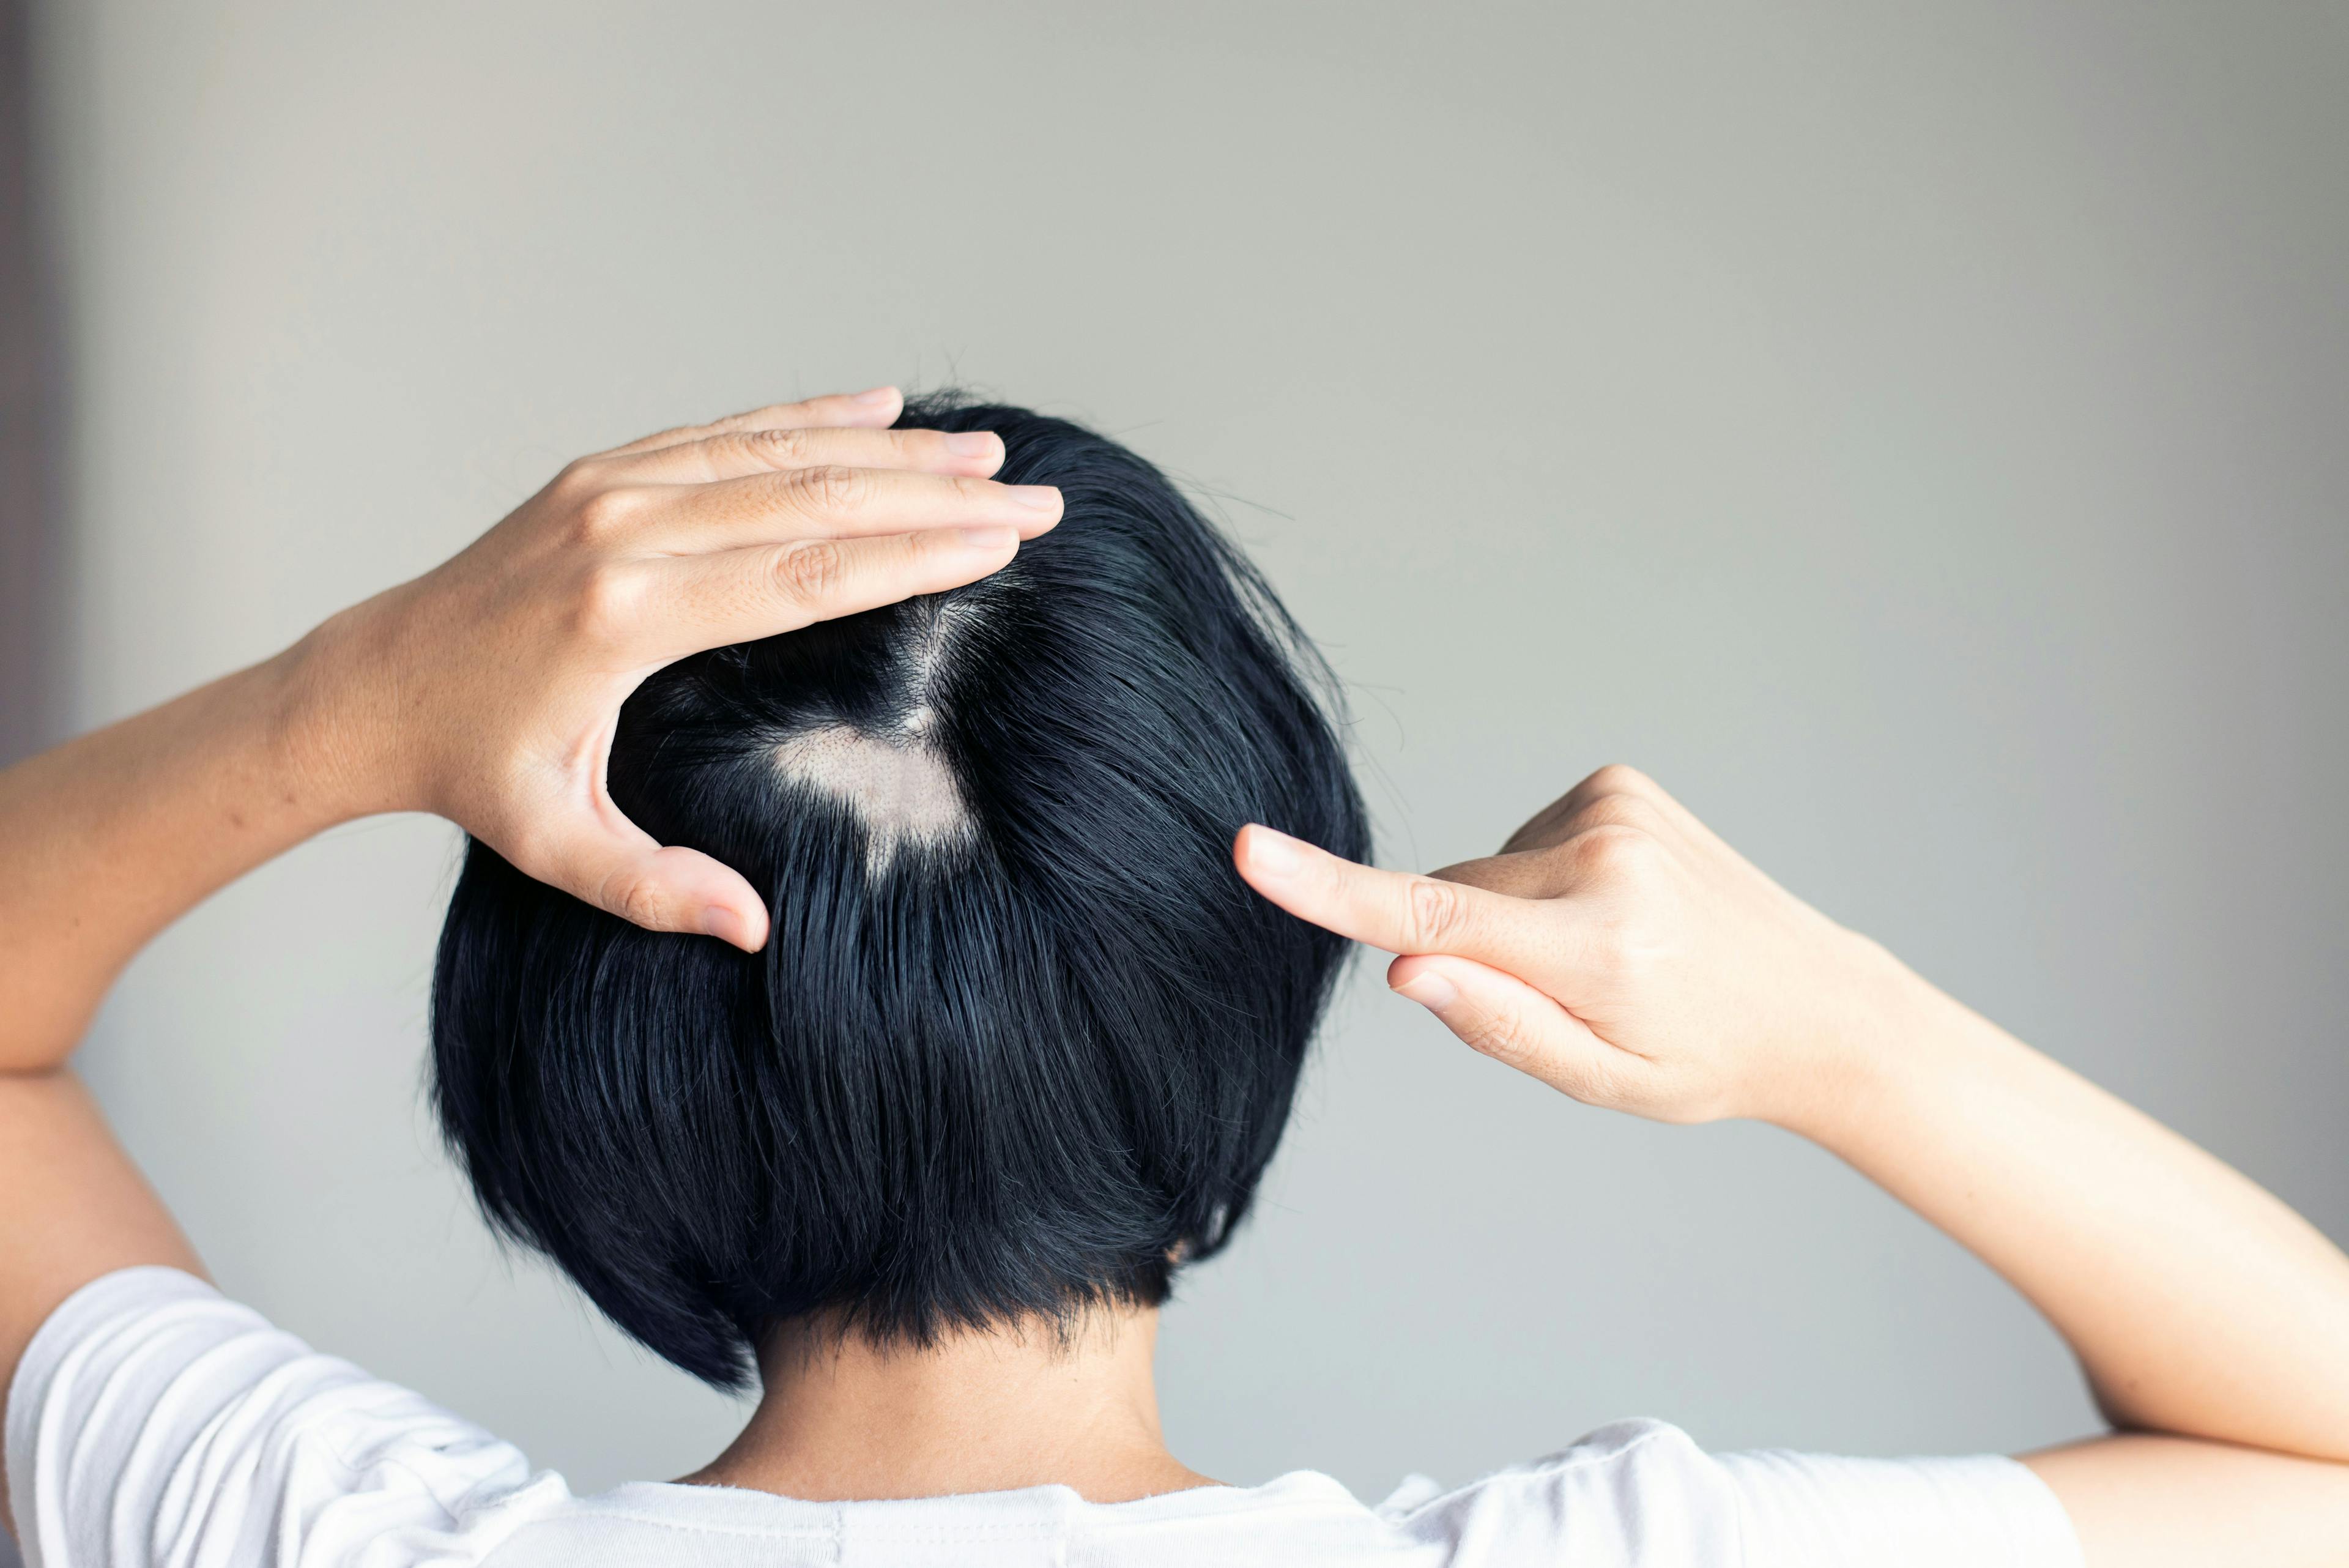 Japanese Study Finds Patients With Alopecia Areata and Physicians Differ in Viewpoints of Severity and Treatment Satisfaction